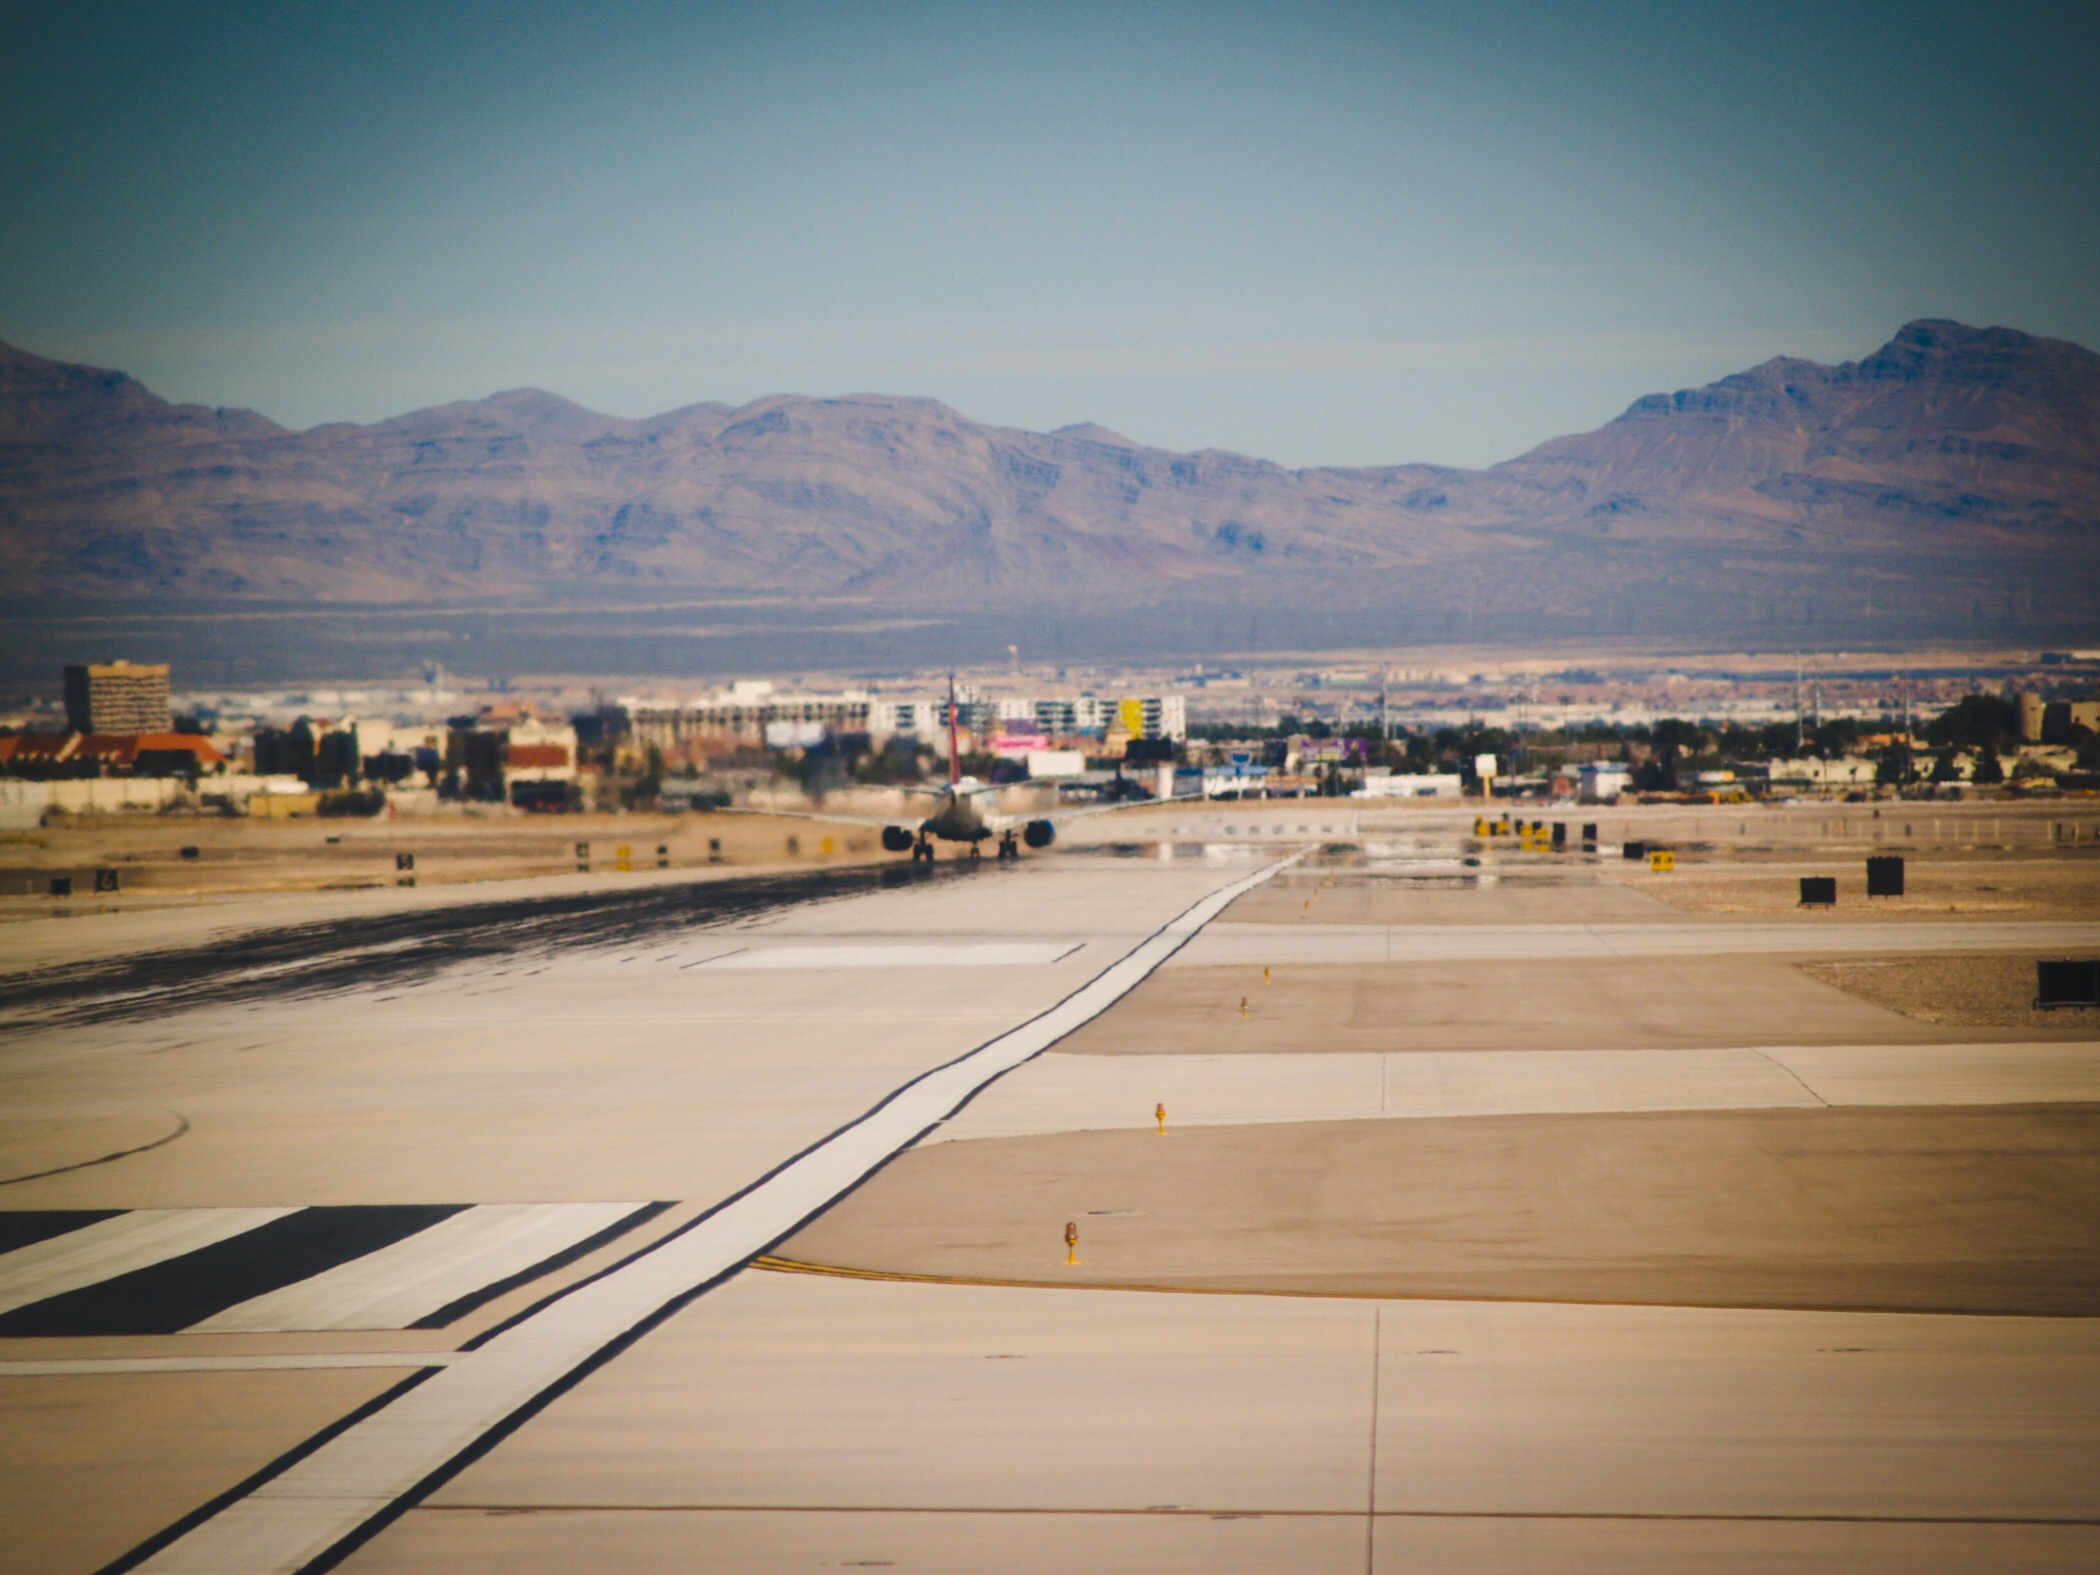 Landed in Las Vegas, with the hot sun beating down on the runway and the beautiful mountains in the background. 